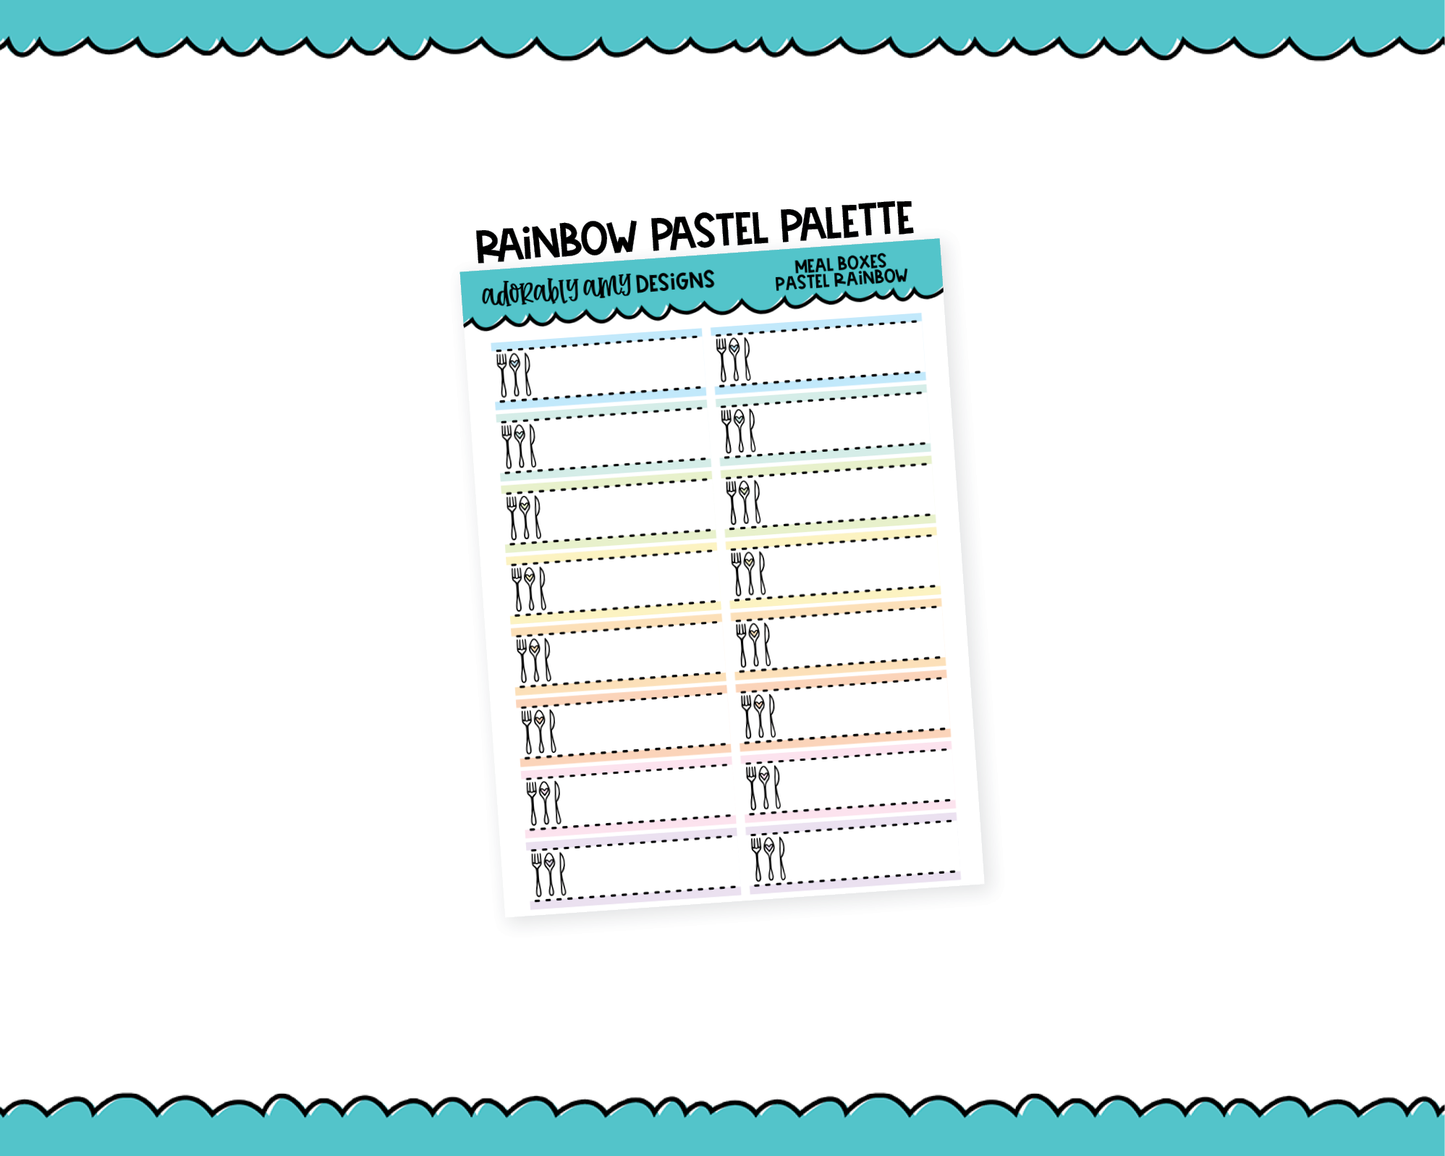 Rainbow Meal Tracker Quarter Box Reminder Tracker Stickers for any Planner or Insert